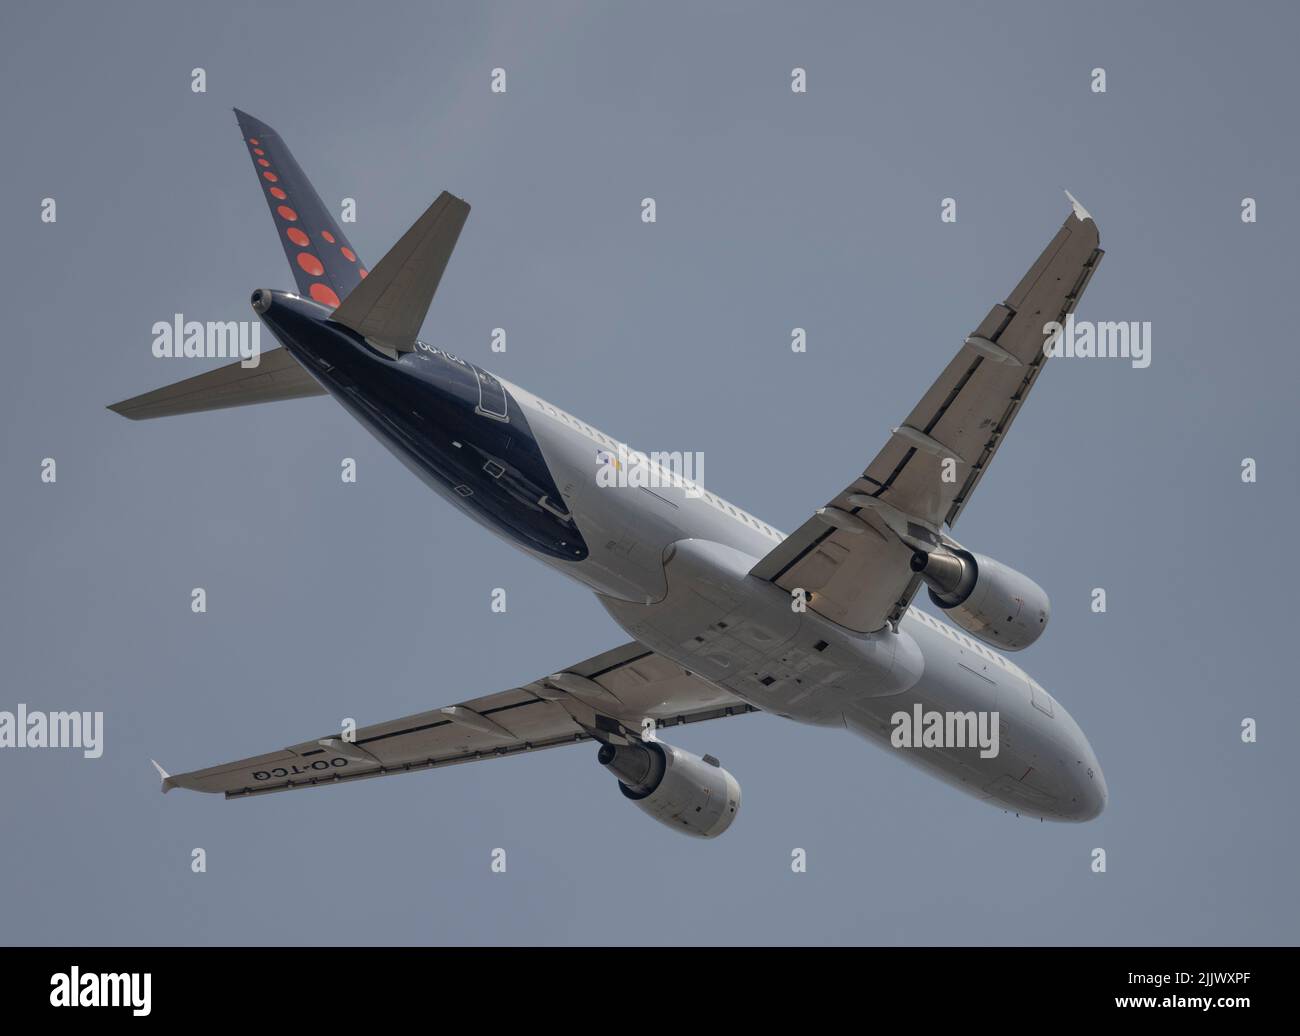 Heathrow Airport, London, UK. 28 July 2022. Brussels Airlines Airbus A320 00-TCQ taking off from Southern runway at Heathrow on London to Brussels route Stock Photo